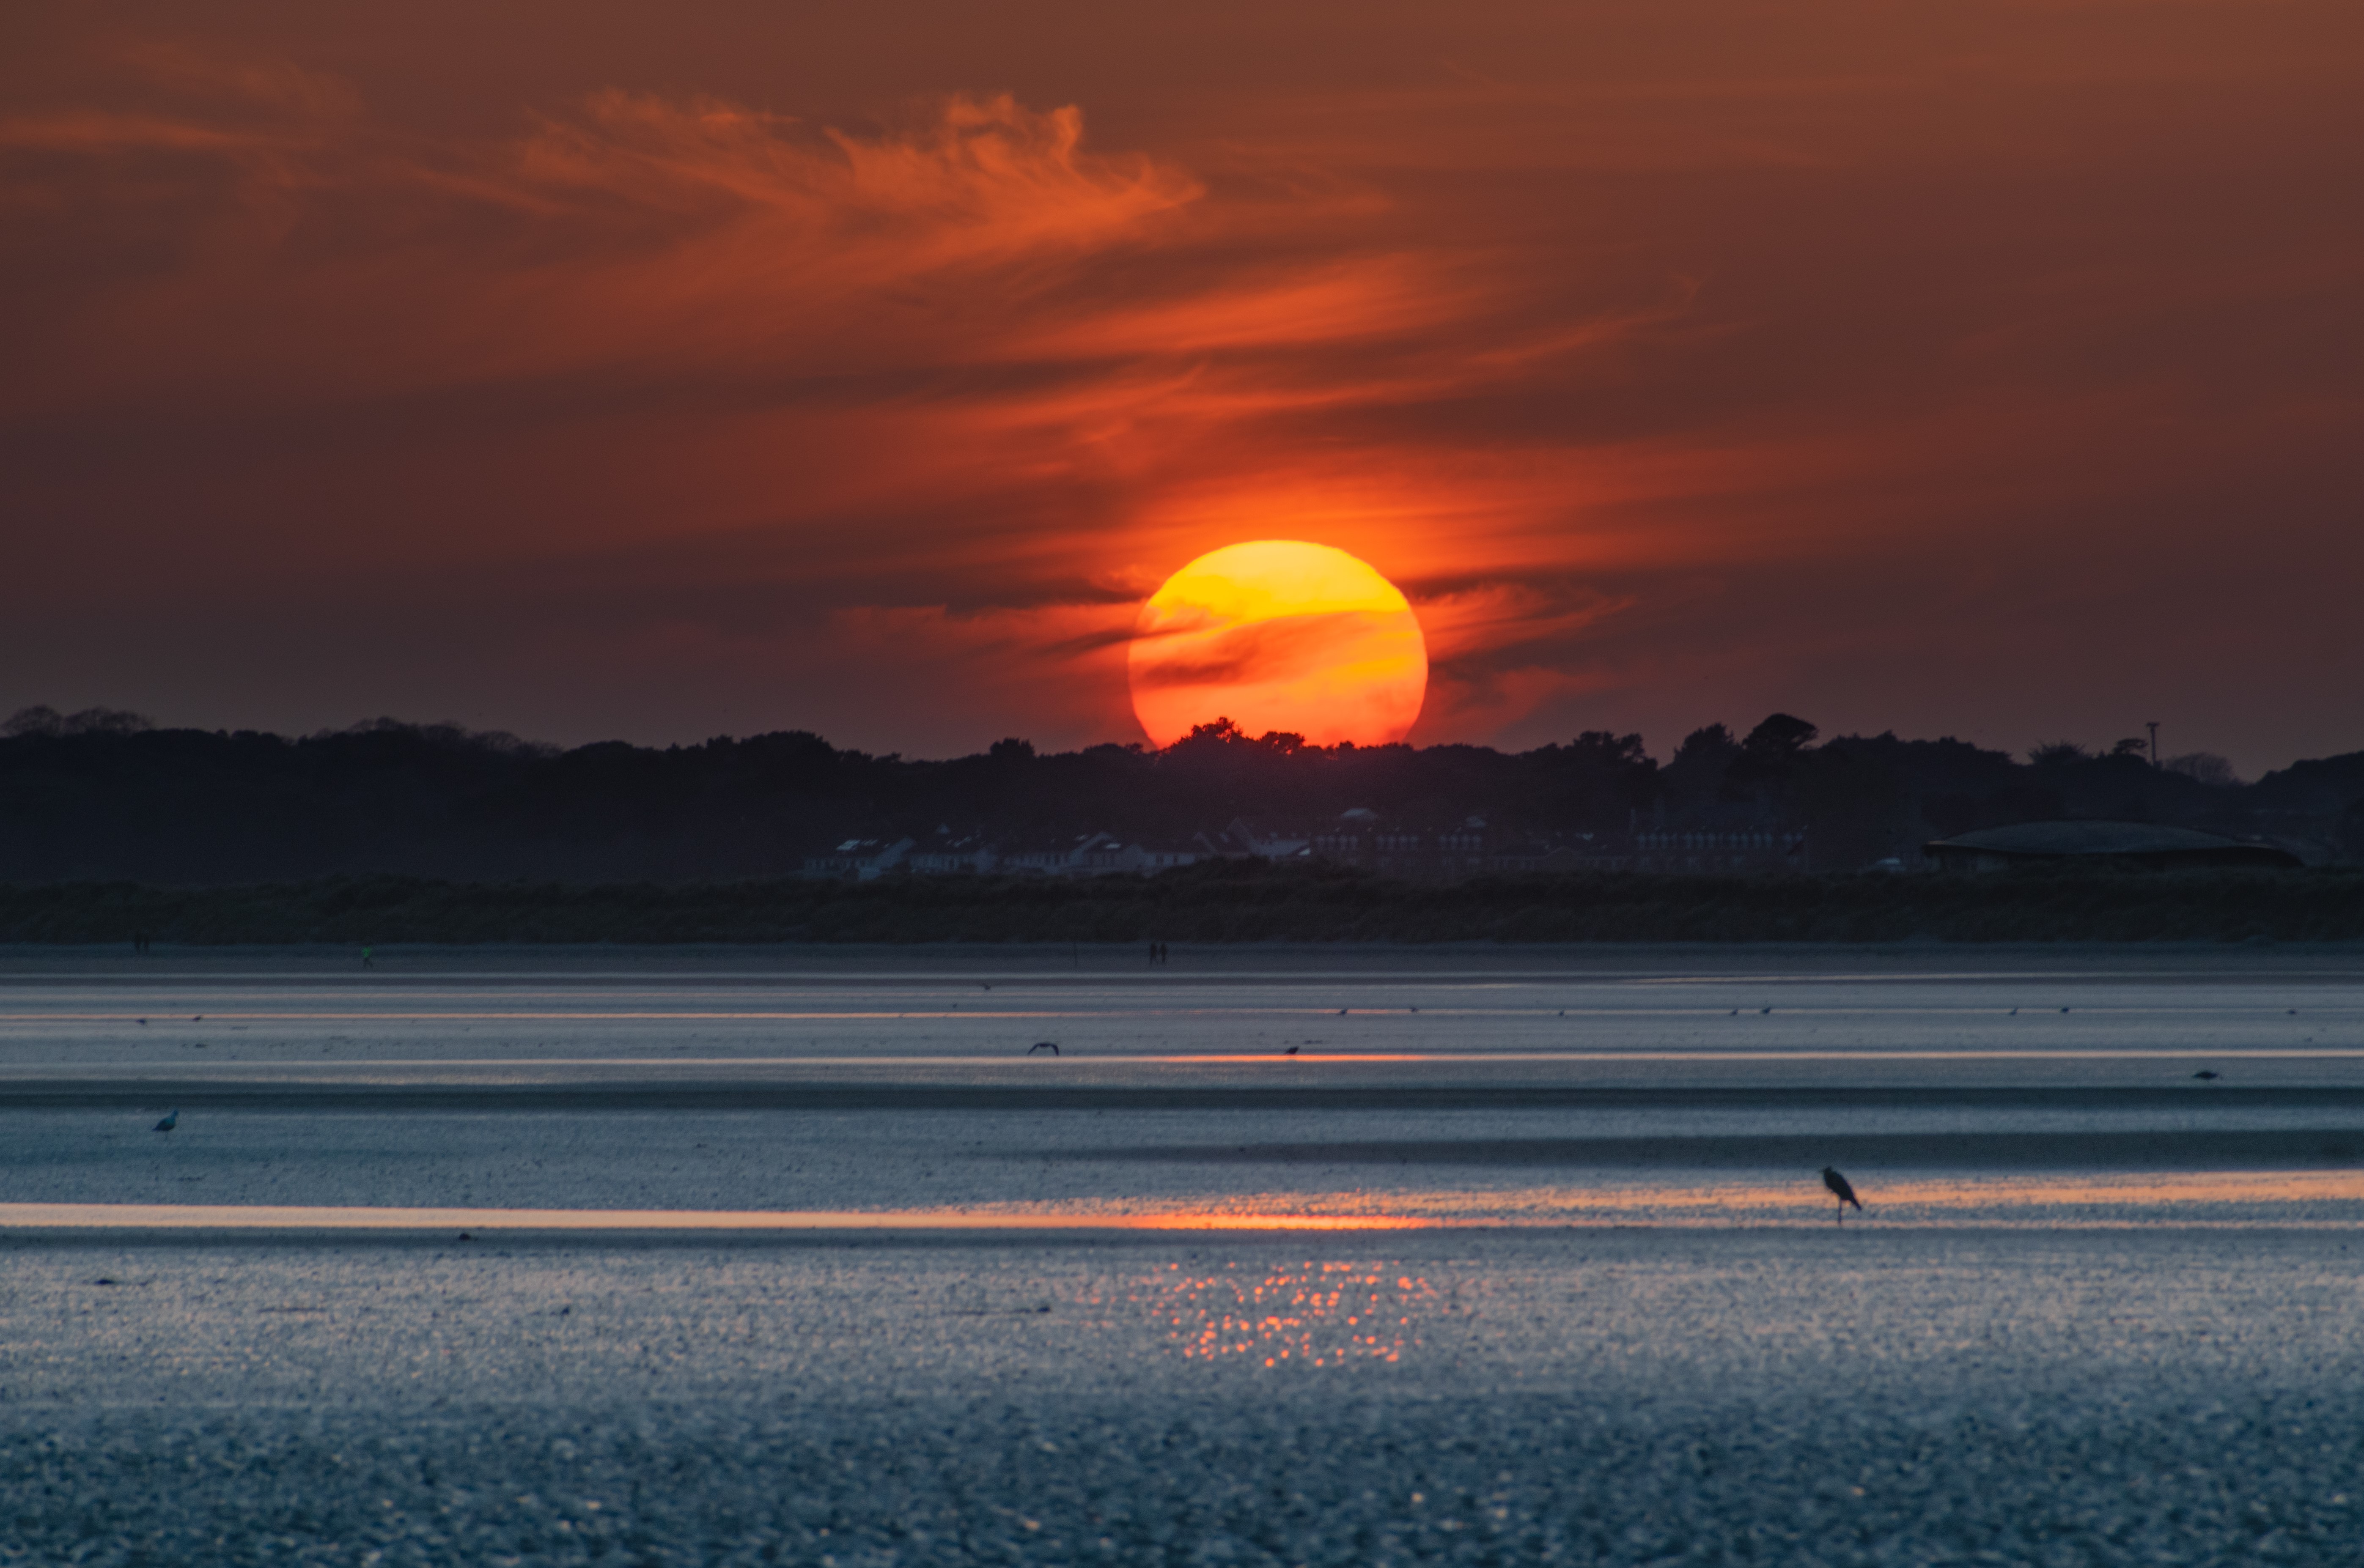 26 March 2020 red sun at Sutton Strand